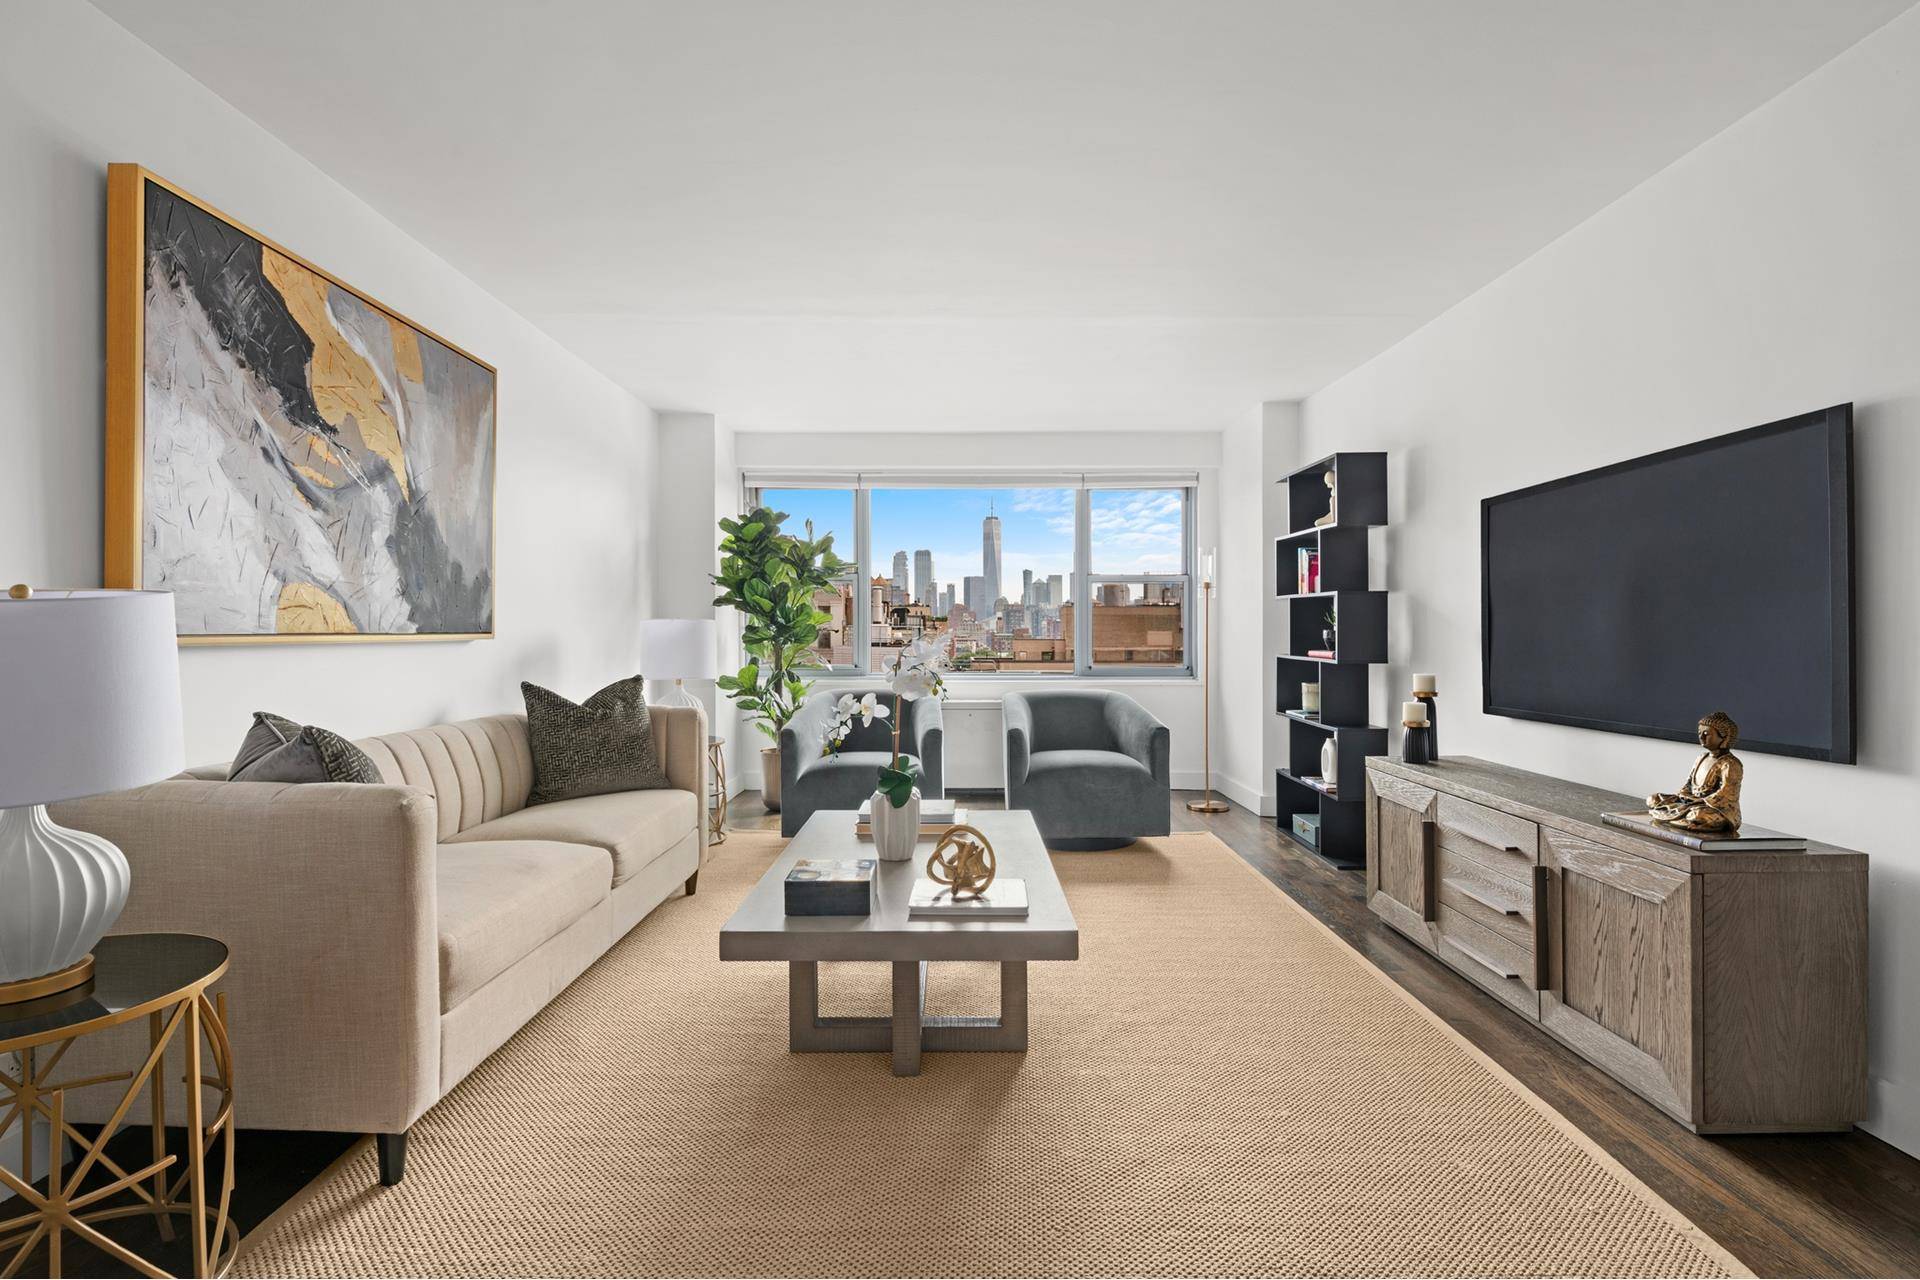 Discover the perfect blend of style and convenience in this large one bedroom apartment, impeccably maintained and bathed in natural light with its southern exposure and expansive windows.